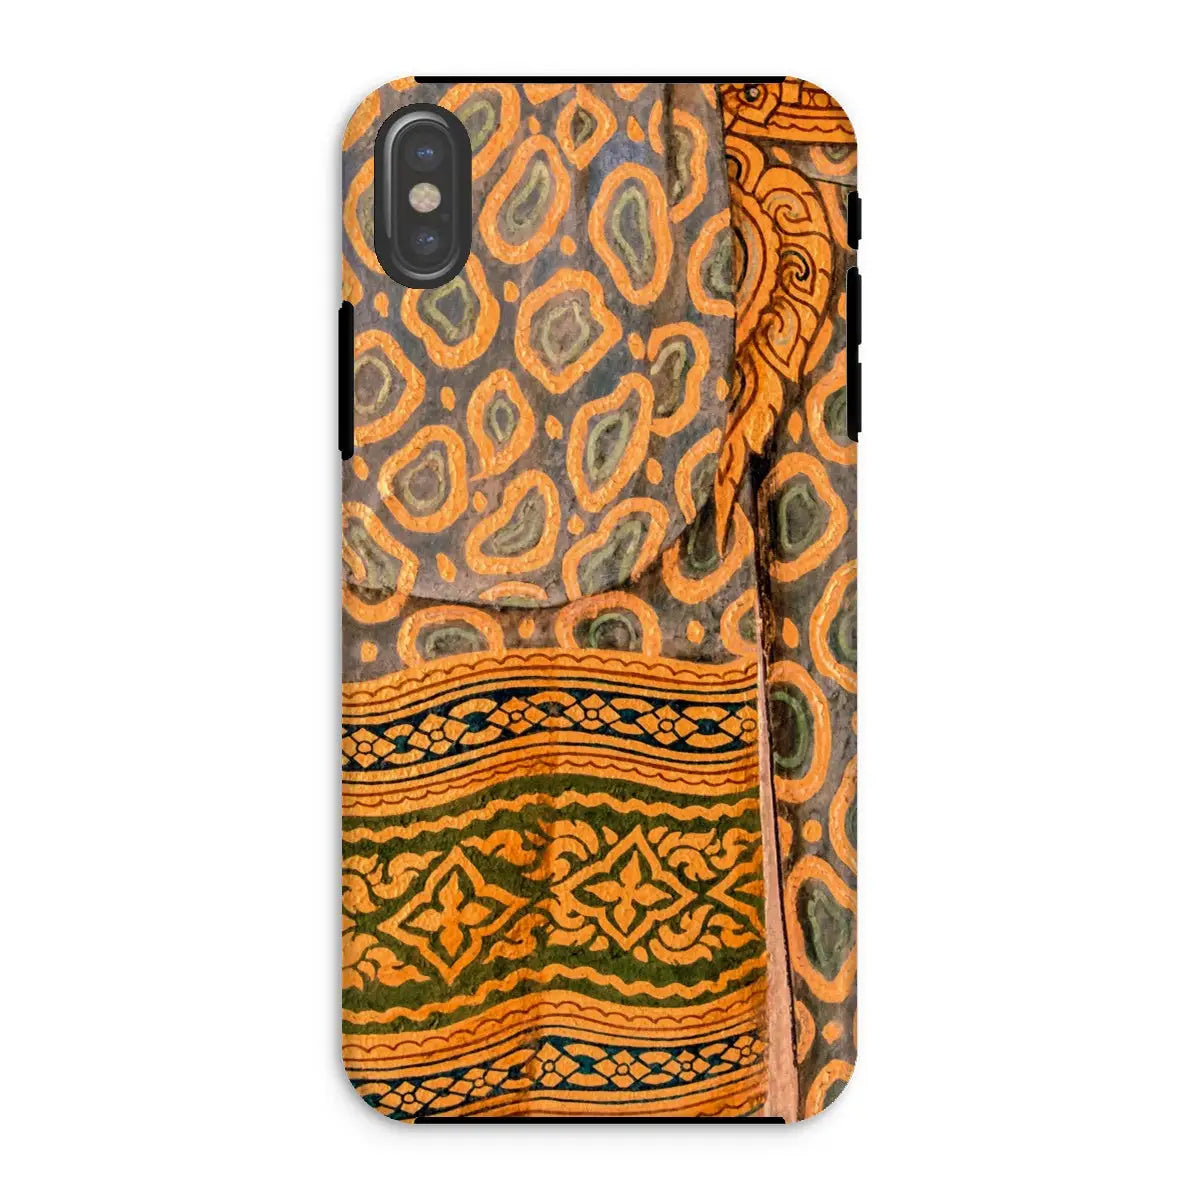 Lady In Waiting - Royal Siam Mural Art Phone Case - Iphone Xs / Matte - Mobile Phone Cases - Aesthetic Art